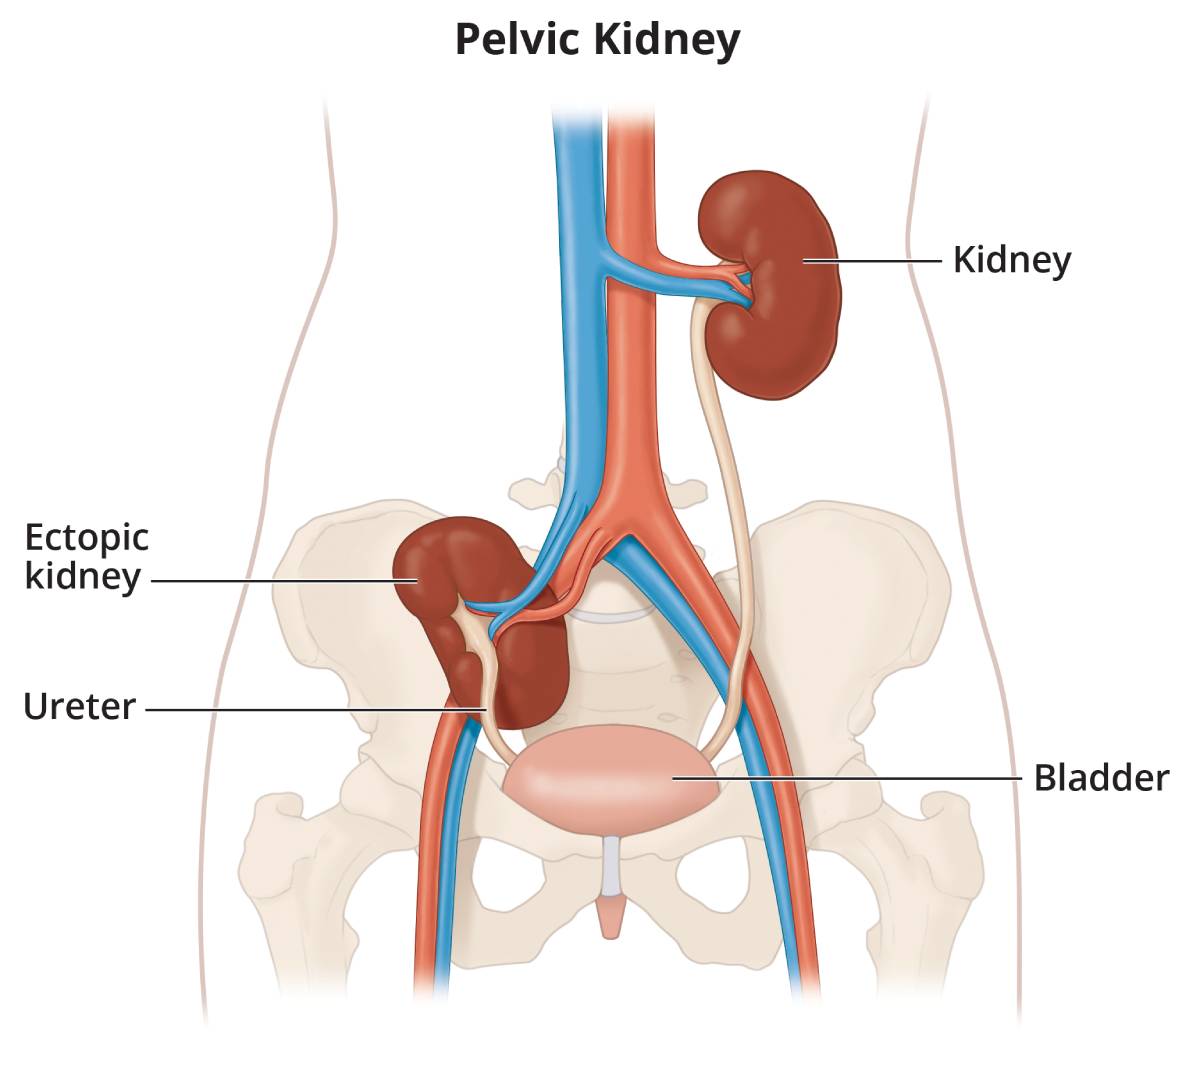 Pelvic kidney, which is a kidney that formed in the pelvis near the bladder.